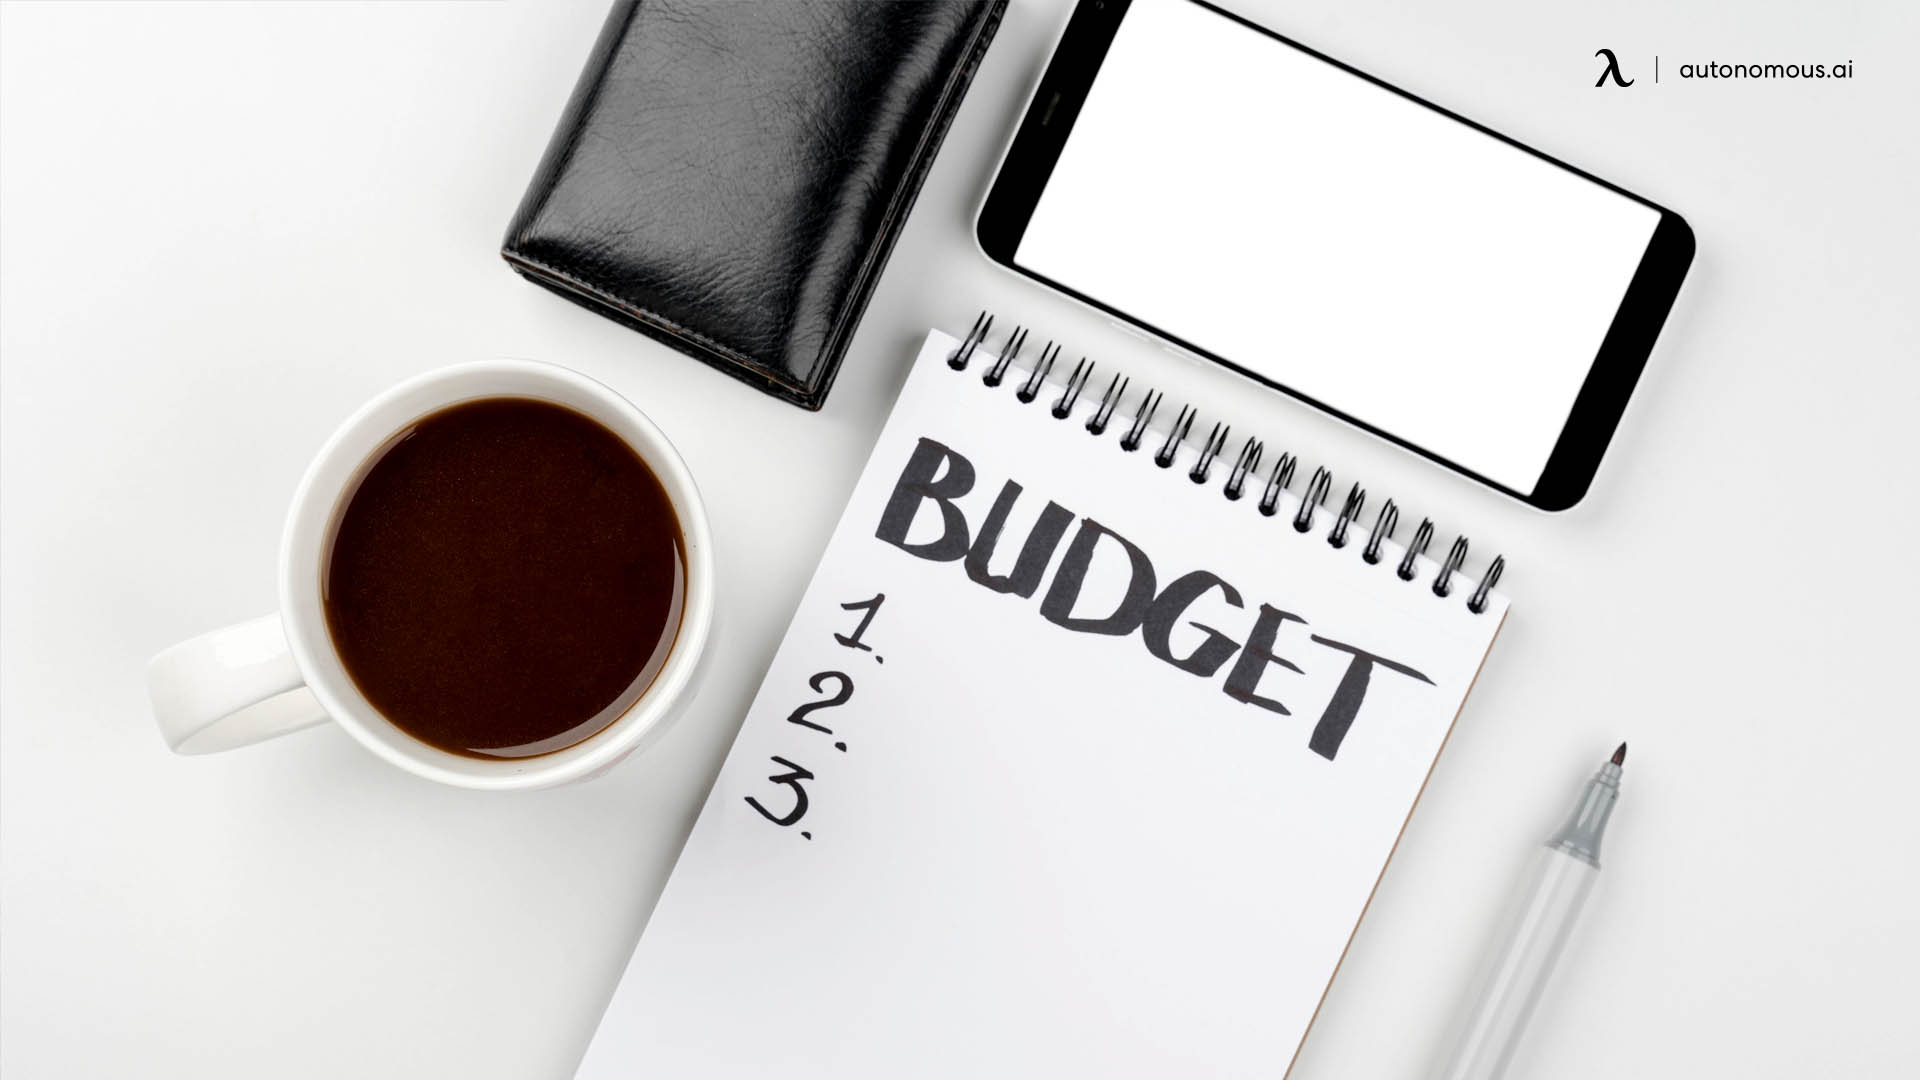 What Is Your Budget?